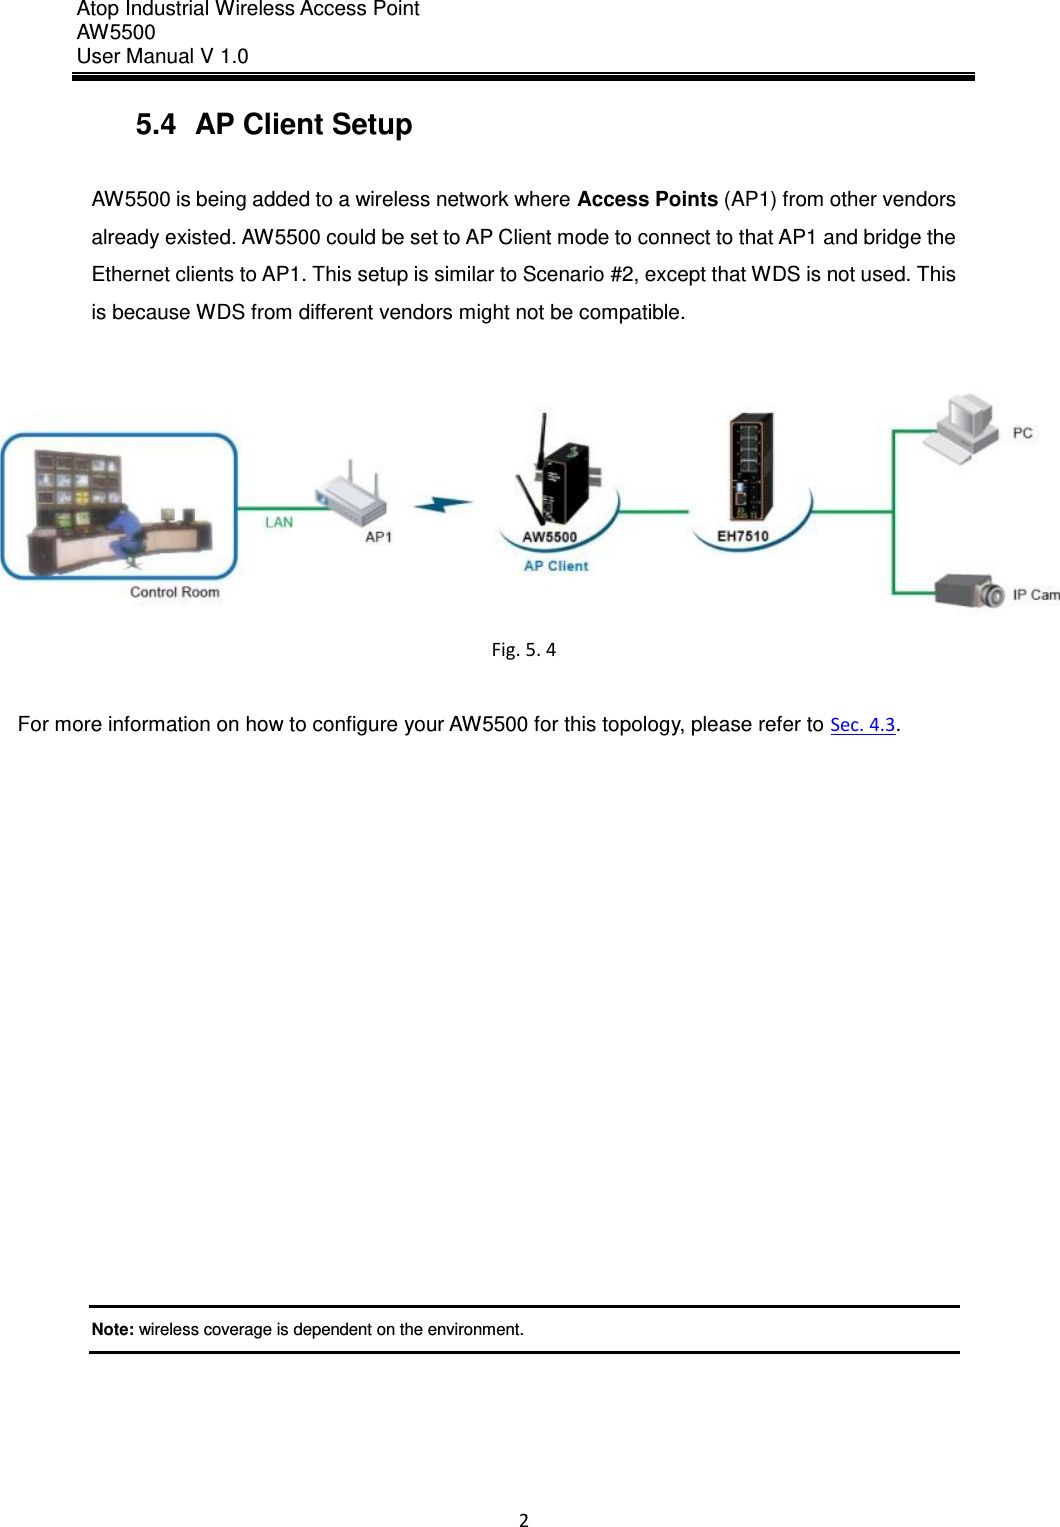 Atop Industrial Wireless Access Point AW 5500 User Manual V 1.0                      2  5.4  AP Client Setup  AW5500 is being added to a wireless network where Access Points (AP1) from other vendors already existed. AW5500 could be set to AP Client mode to connect to that AP1 and bridge the Ethernet clients to AP1. This setup is similar to Scenario #2, except that WDS is not used. This is because WDS from different vendors might not be compatible.   Fig. 5. 4  For more information on how to configure your AW5500 for this topology, please refer to Sec. 4.3.                Note: wireless coverage is dependent on the environment.   